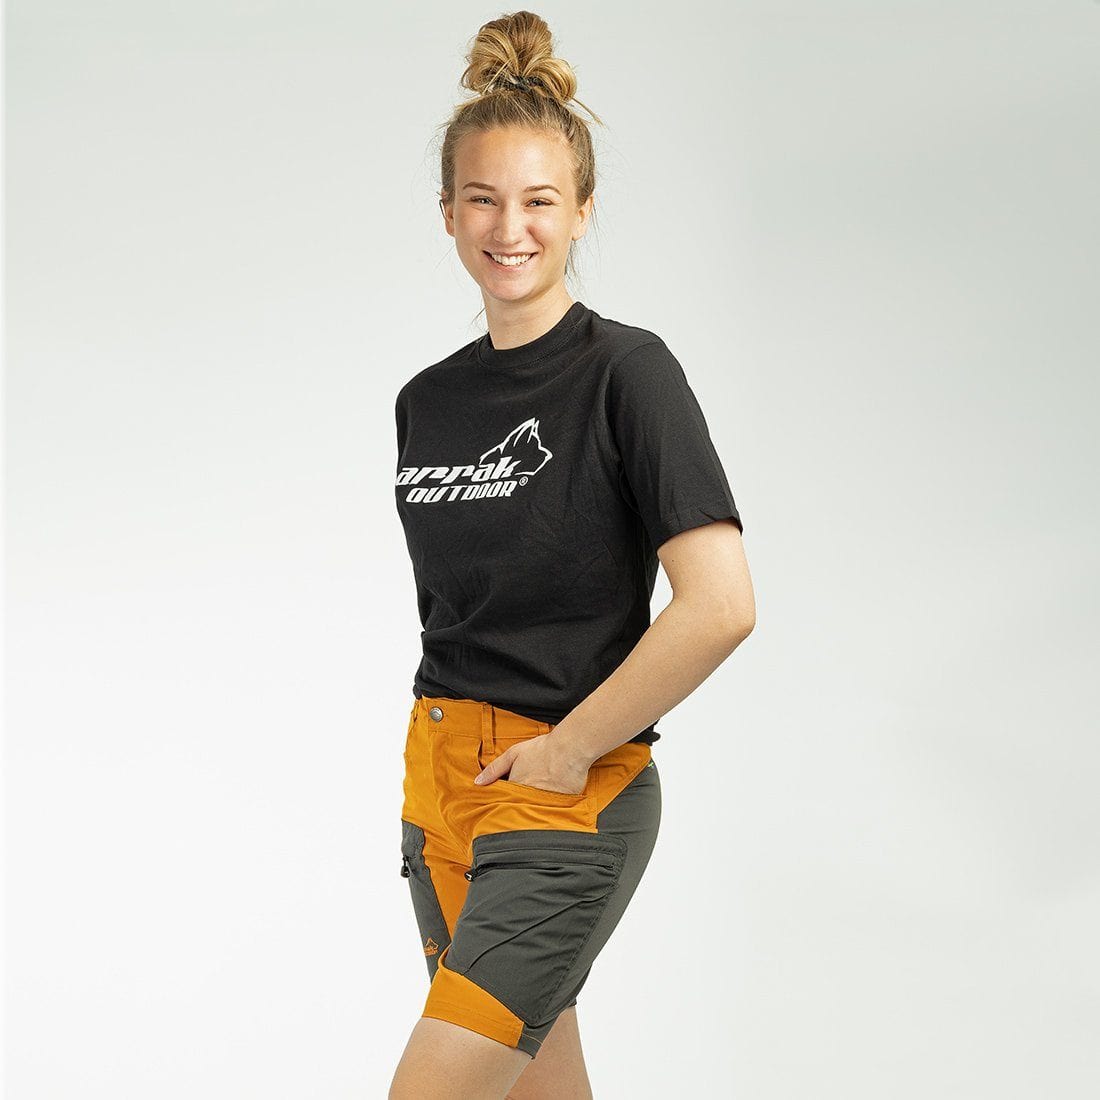 Upgrade Your Outdoor Style with Arrak Redesigned Shorts - Functional and Stylish with Multiple Pockets for Convenient Storage. Shop Now Arrak Outdoor USA